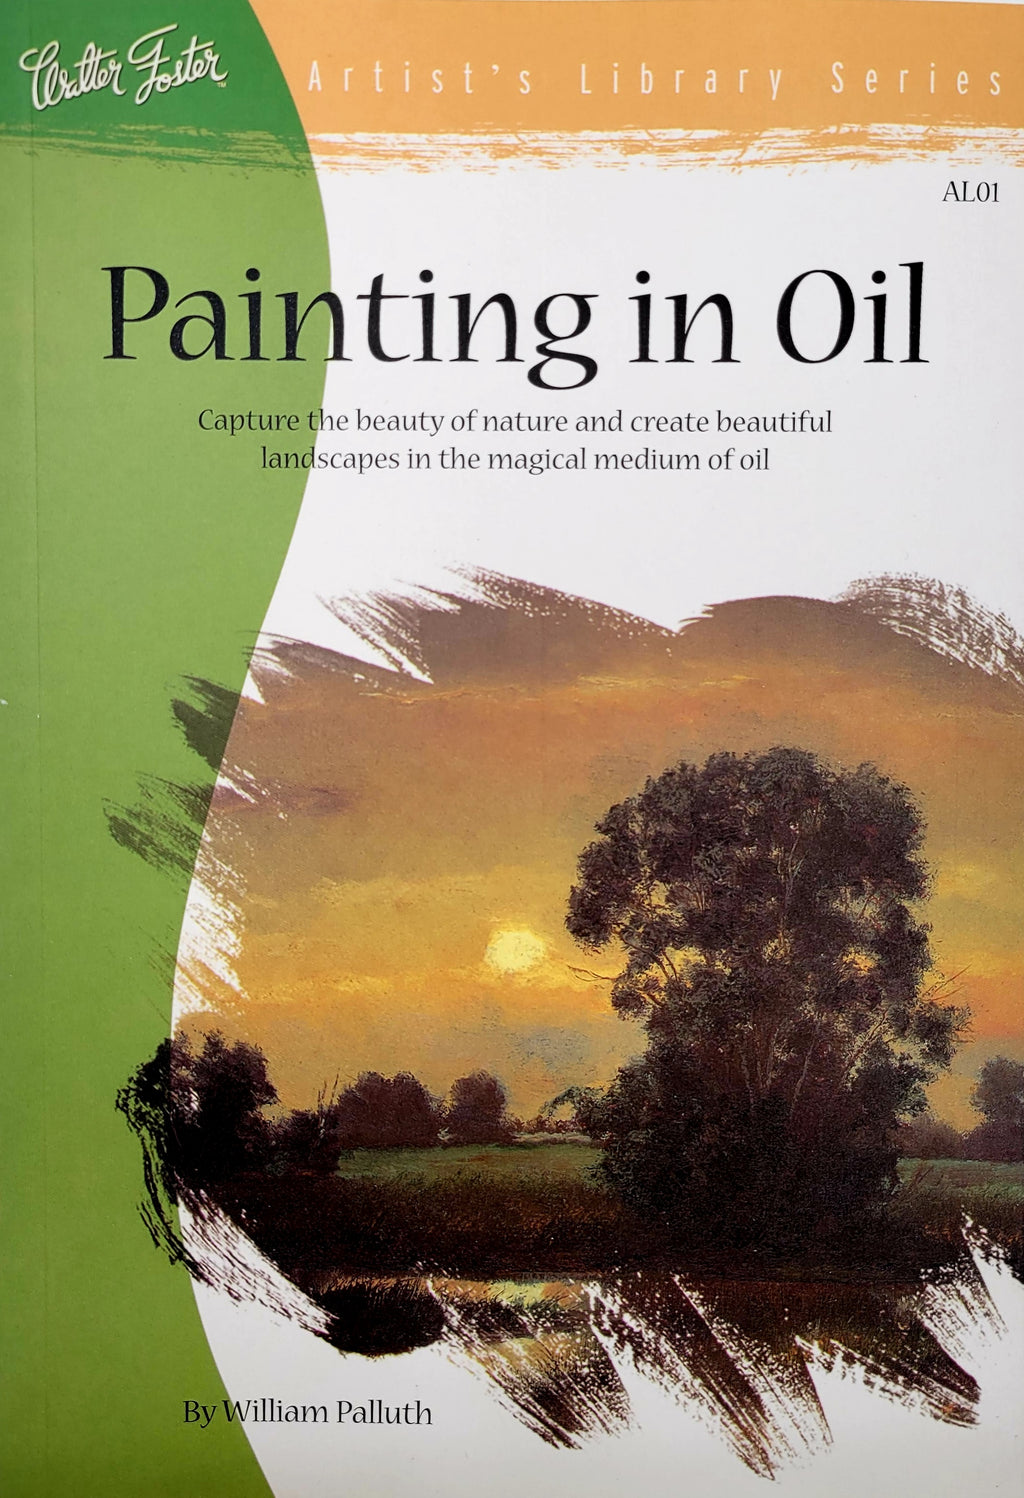 Painting in Oil, Walter Foster Artist's Library Series